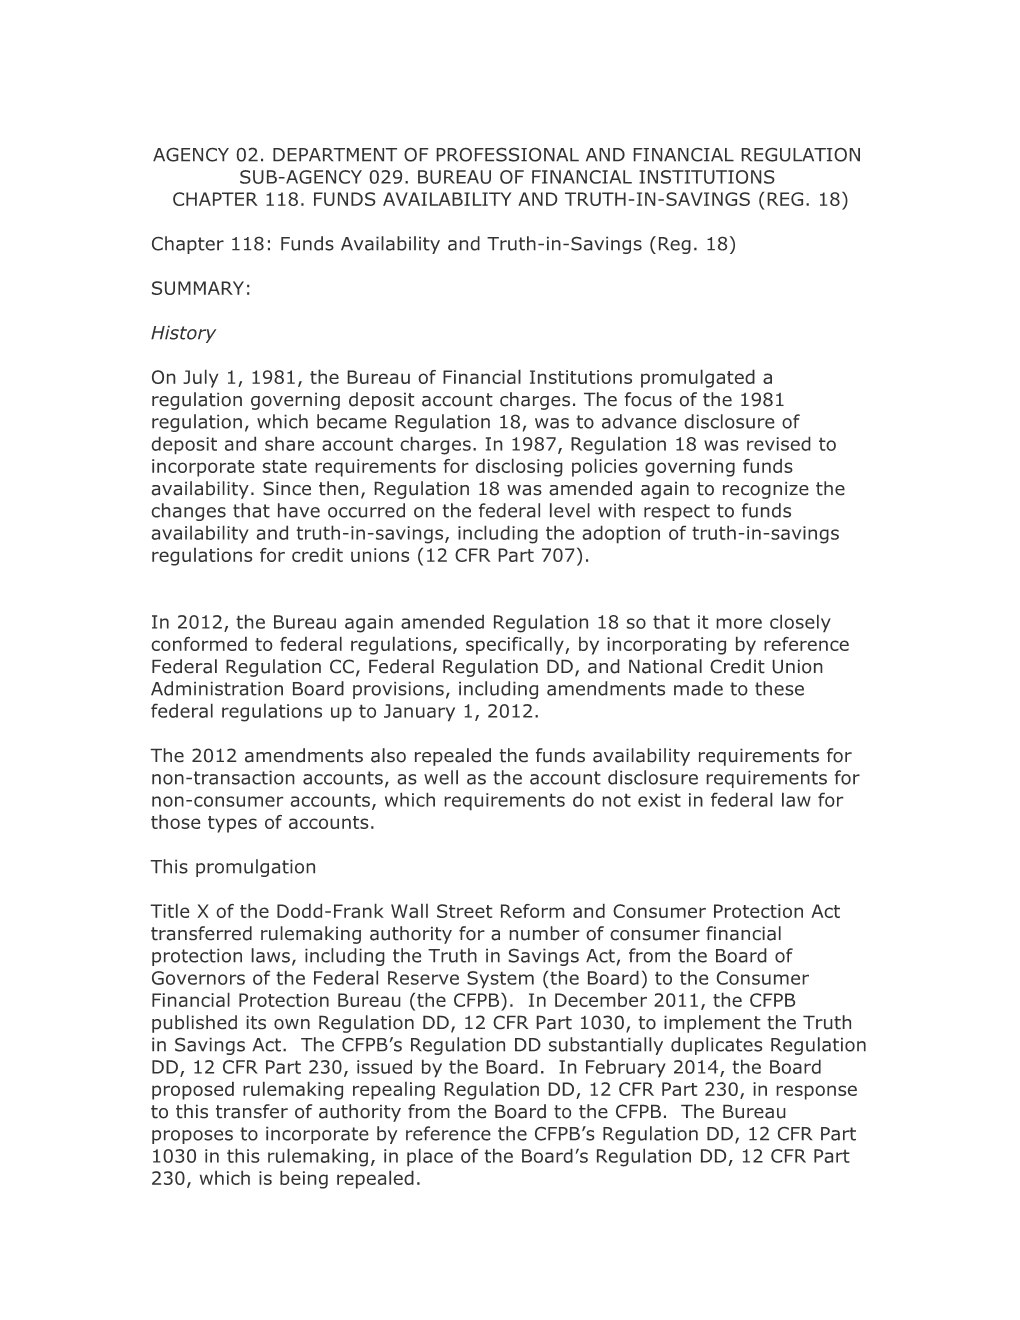 Agency 02. Department of Professional and Financial Regulation Sub-Agency 029. Bureau Of